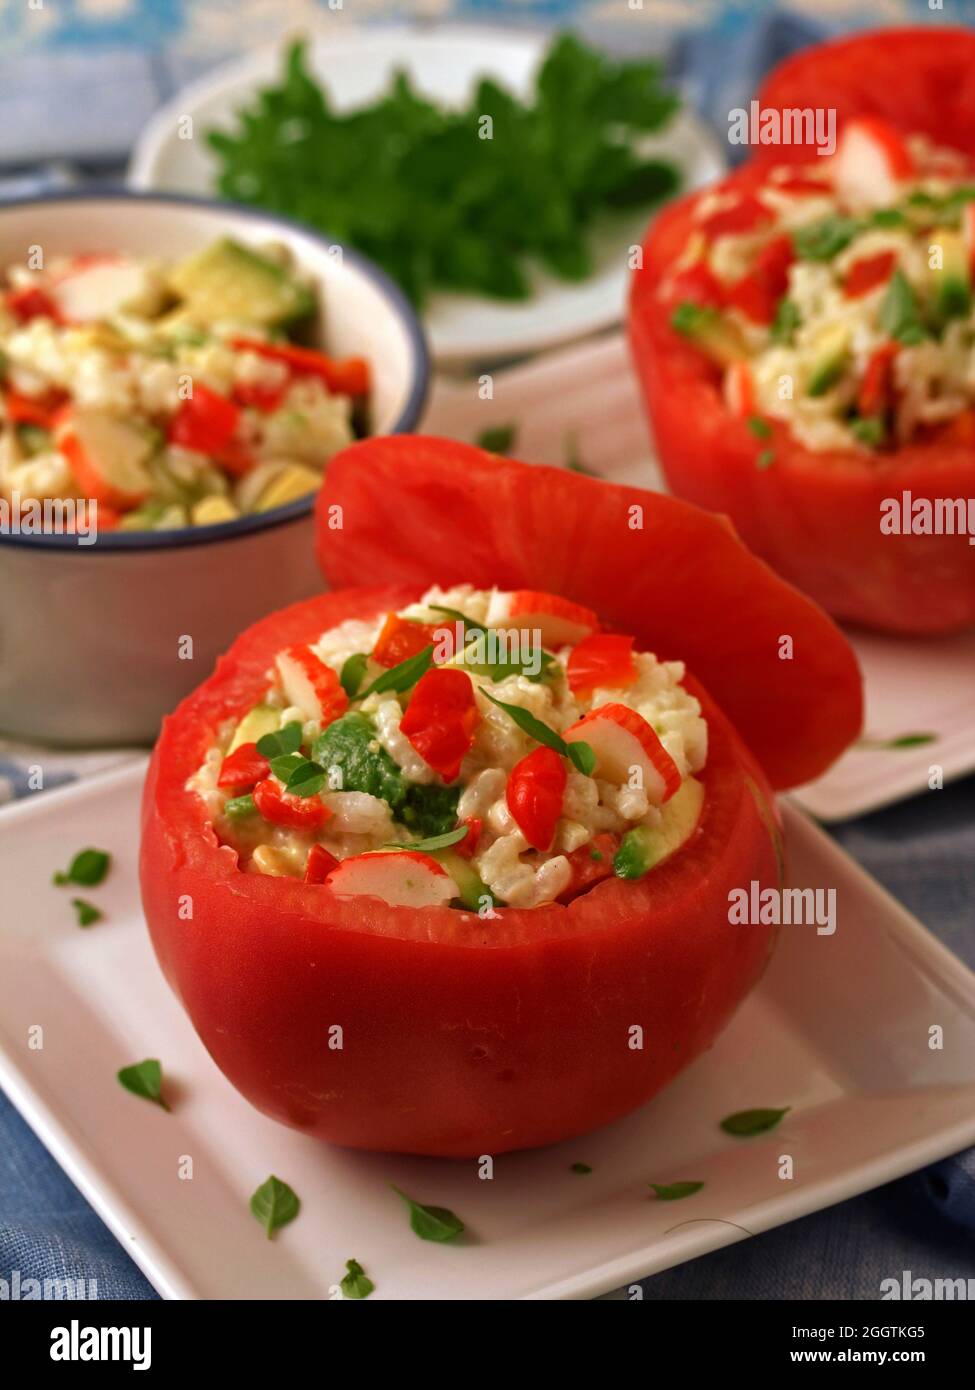 Filled tomatoes with rice, surimi and veggies. Stock Photo